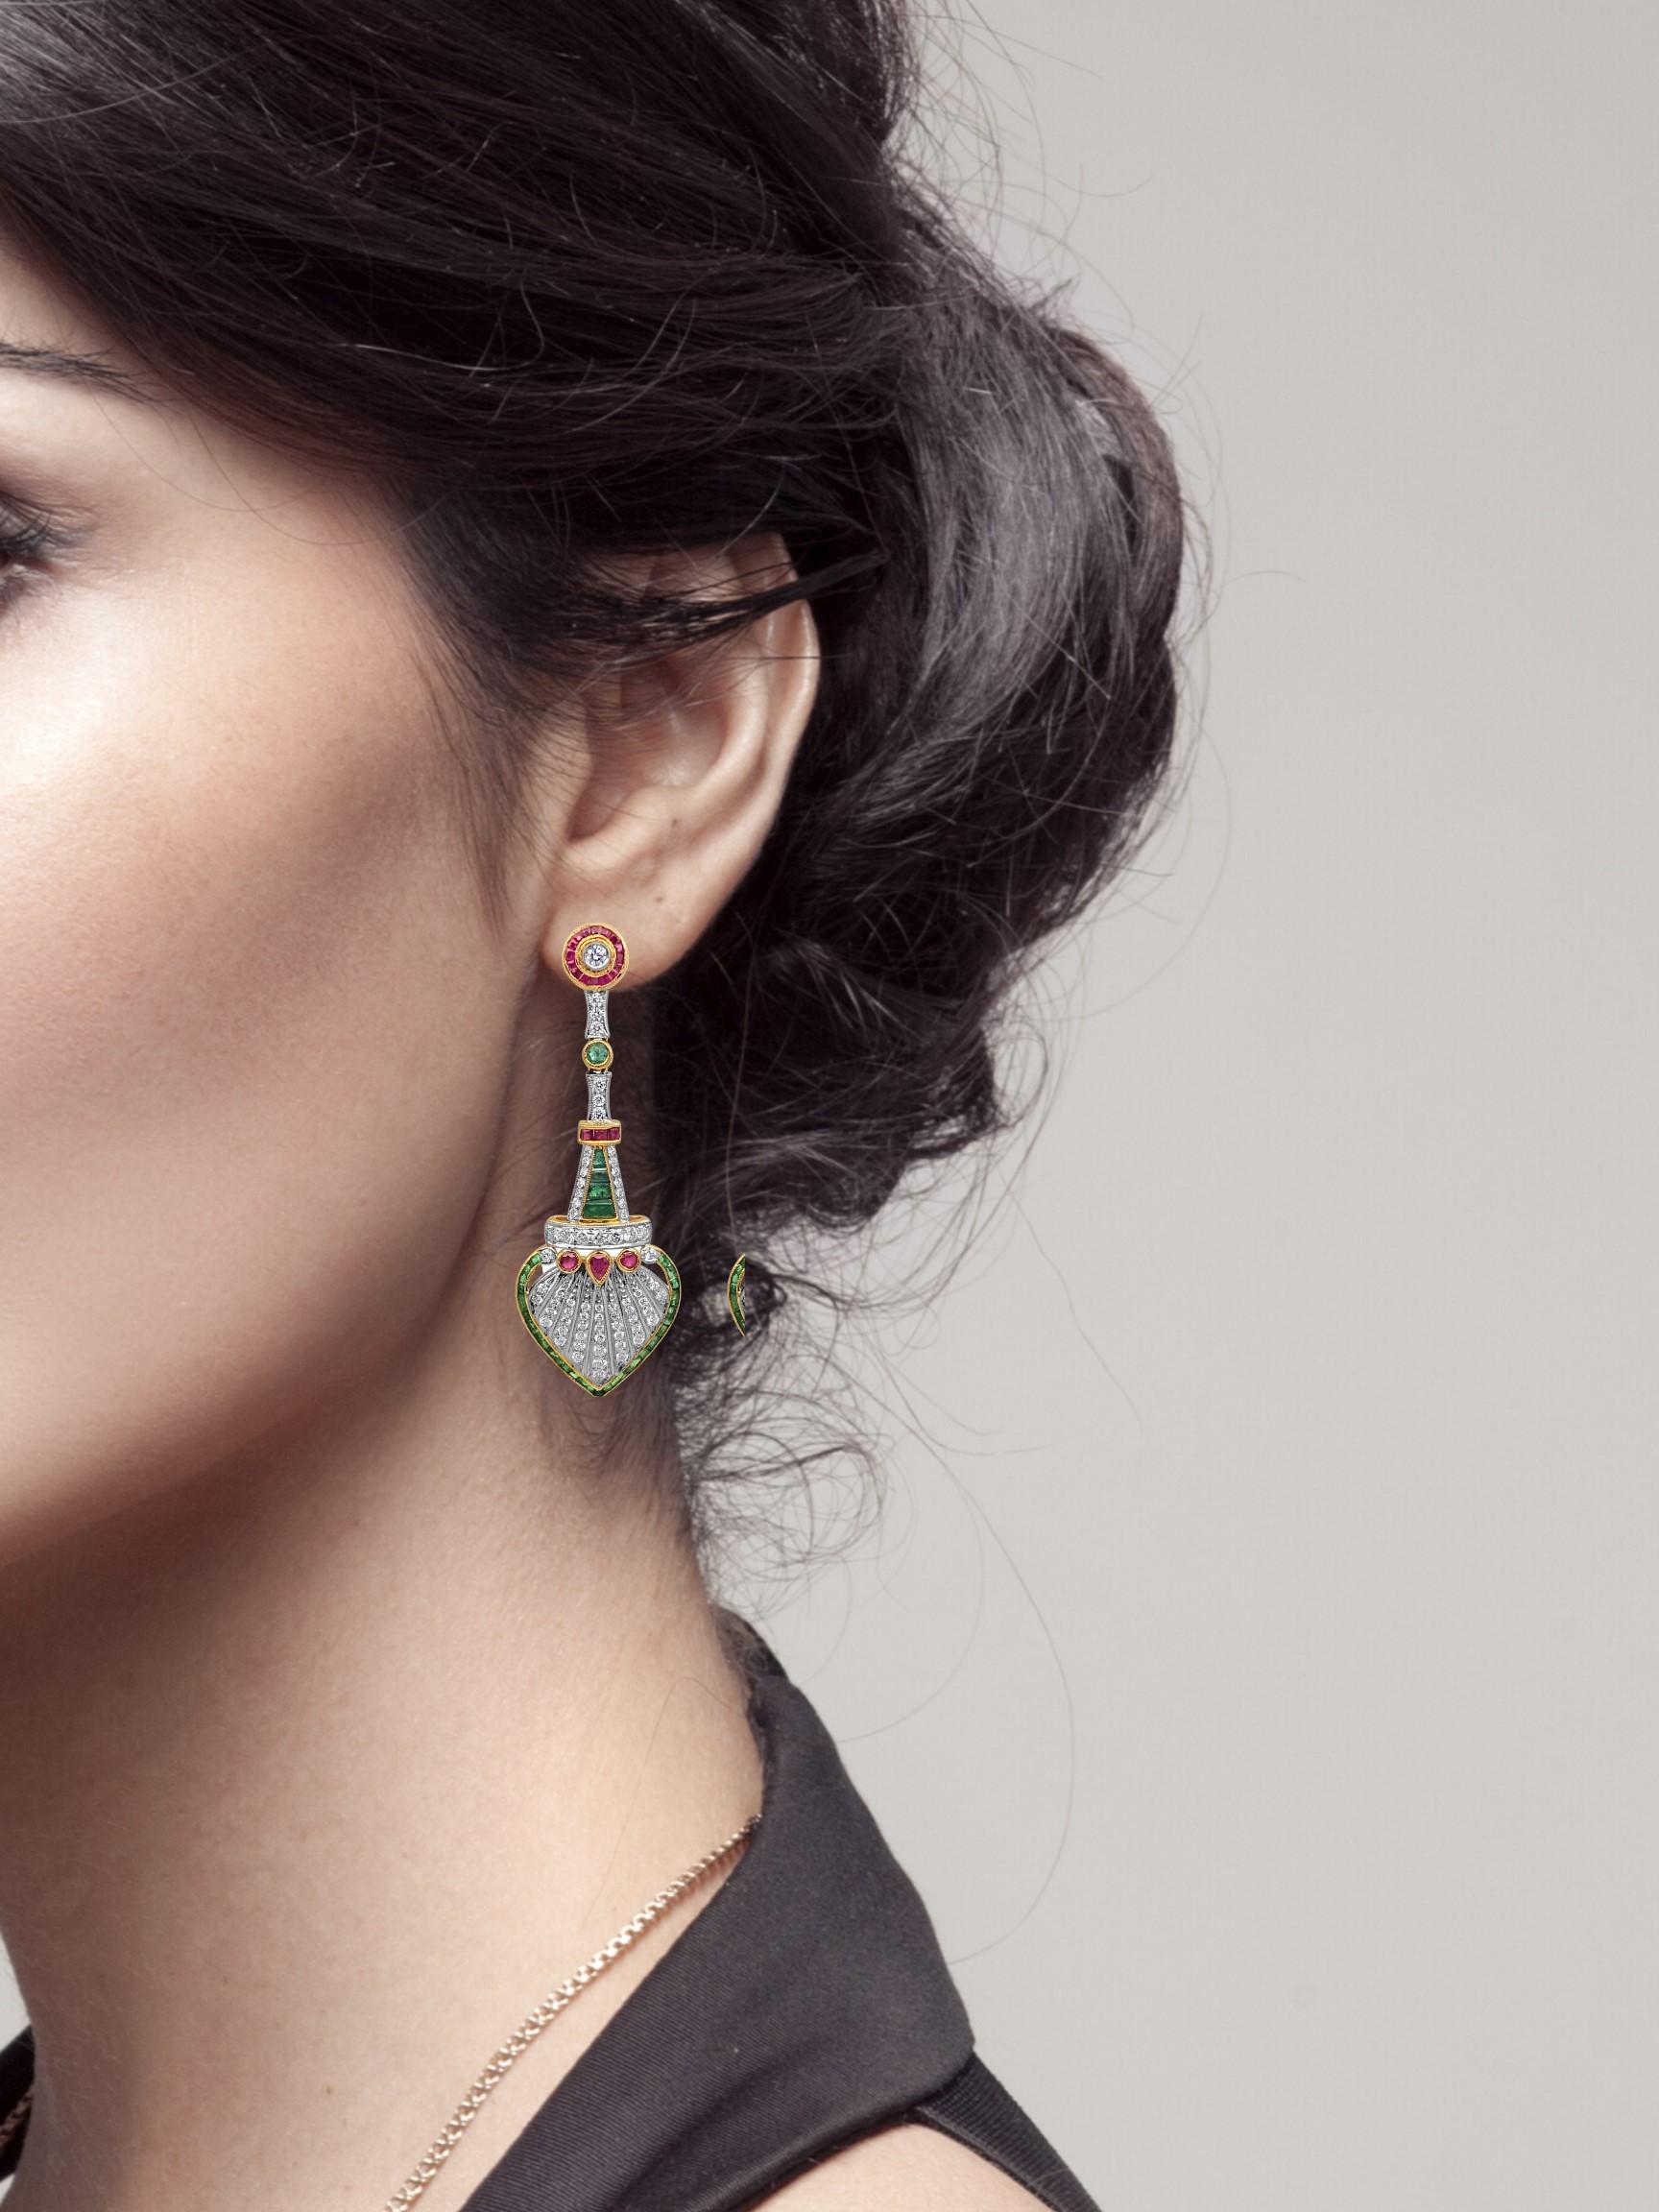 The Morni Nritya draw its inspiration of a dancing peacock. A true-mix of traditional Indian designs and European art decor, these earring feature rubies, diamonds and emeralds, set in 18K white gold.

